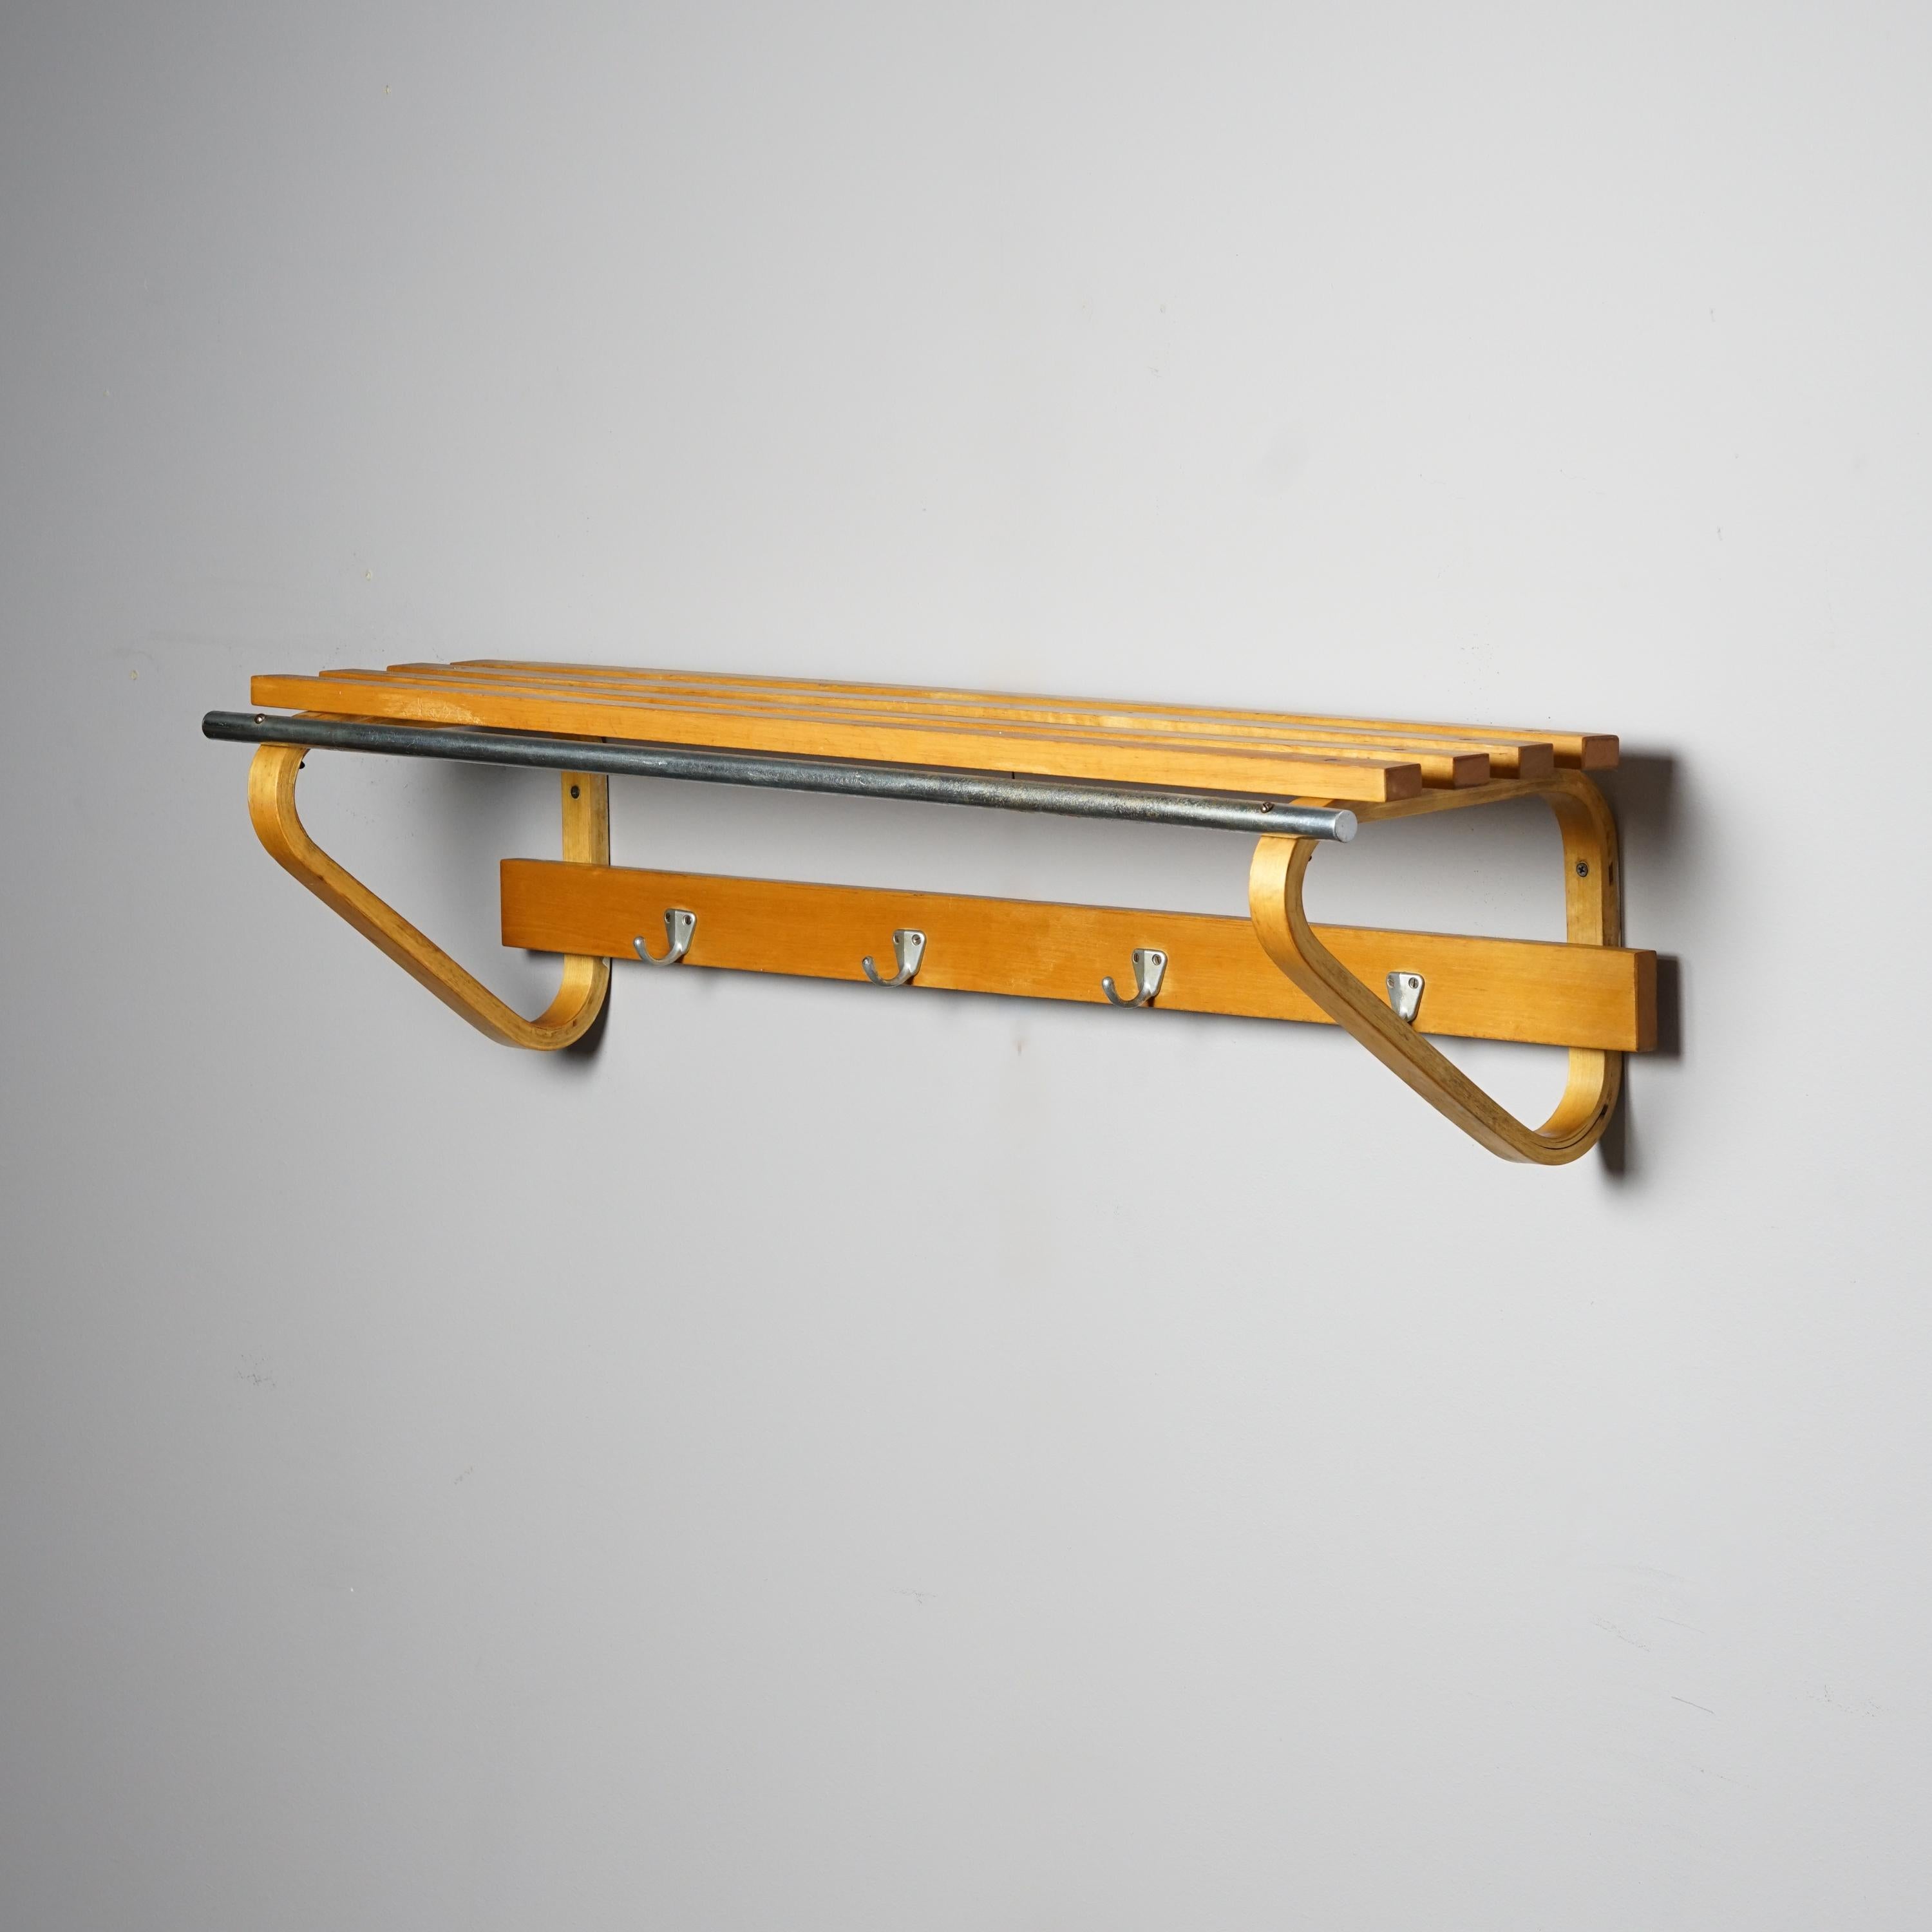 Alvar Aalto coat rack for Artek from the mid-1900s. Birch with metal details. Classic Alvar Aalto design. Good vintage condition, minor wear consistent with age and use.